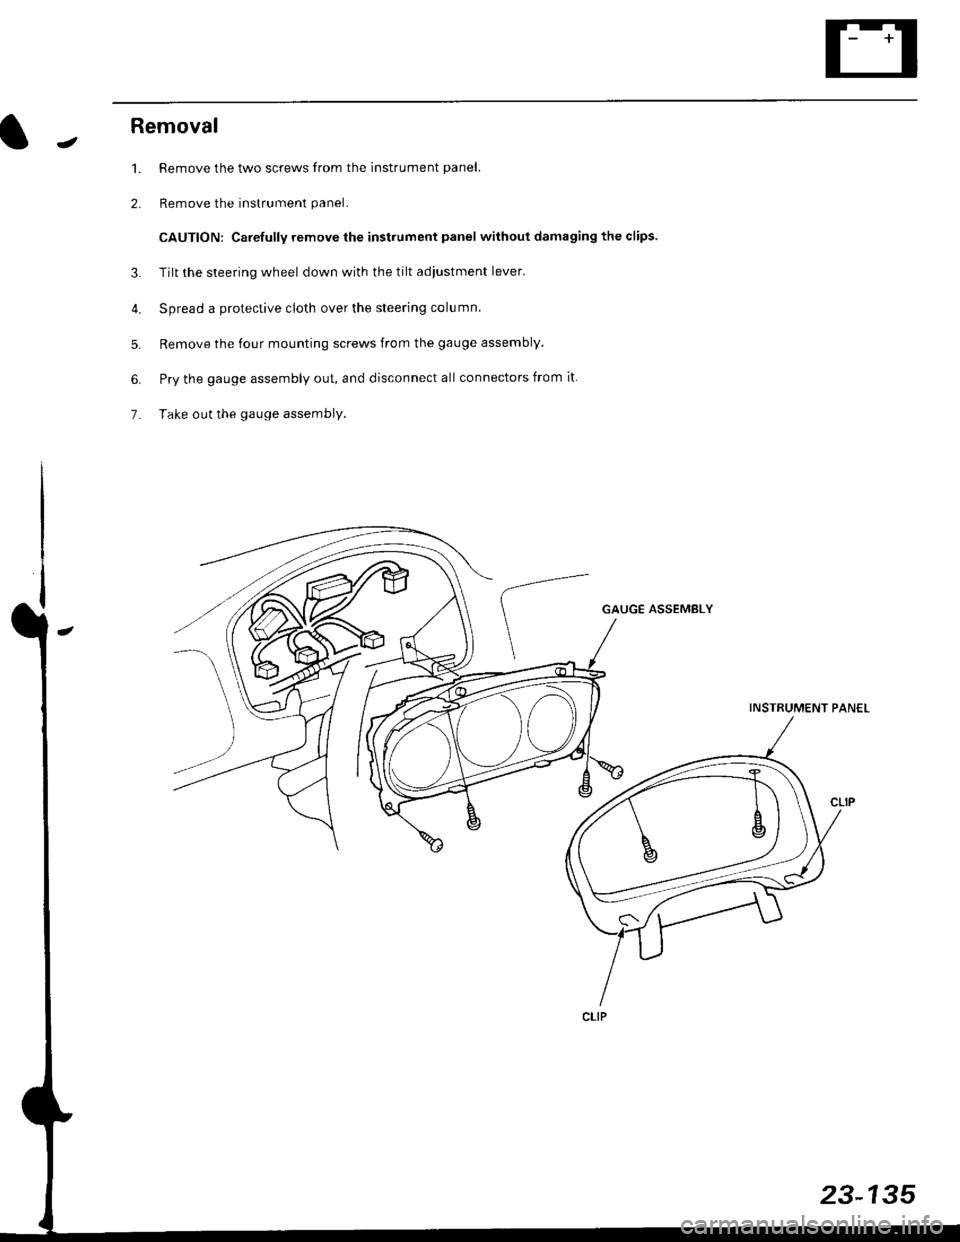 HONDA CIVIC 1996 6.G Workshop Manual JRemoval
1. Remove the two screws from the instrument panel.
2. Remove the instrument panel.
CAUTION: Carefully remove the instrument panel without damaging the clips.
3. Tilt the steering wheel down 